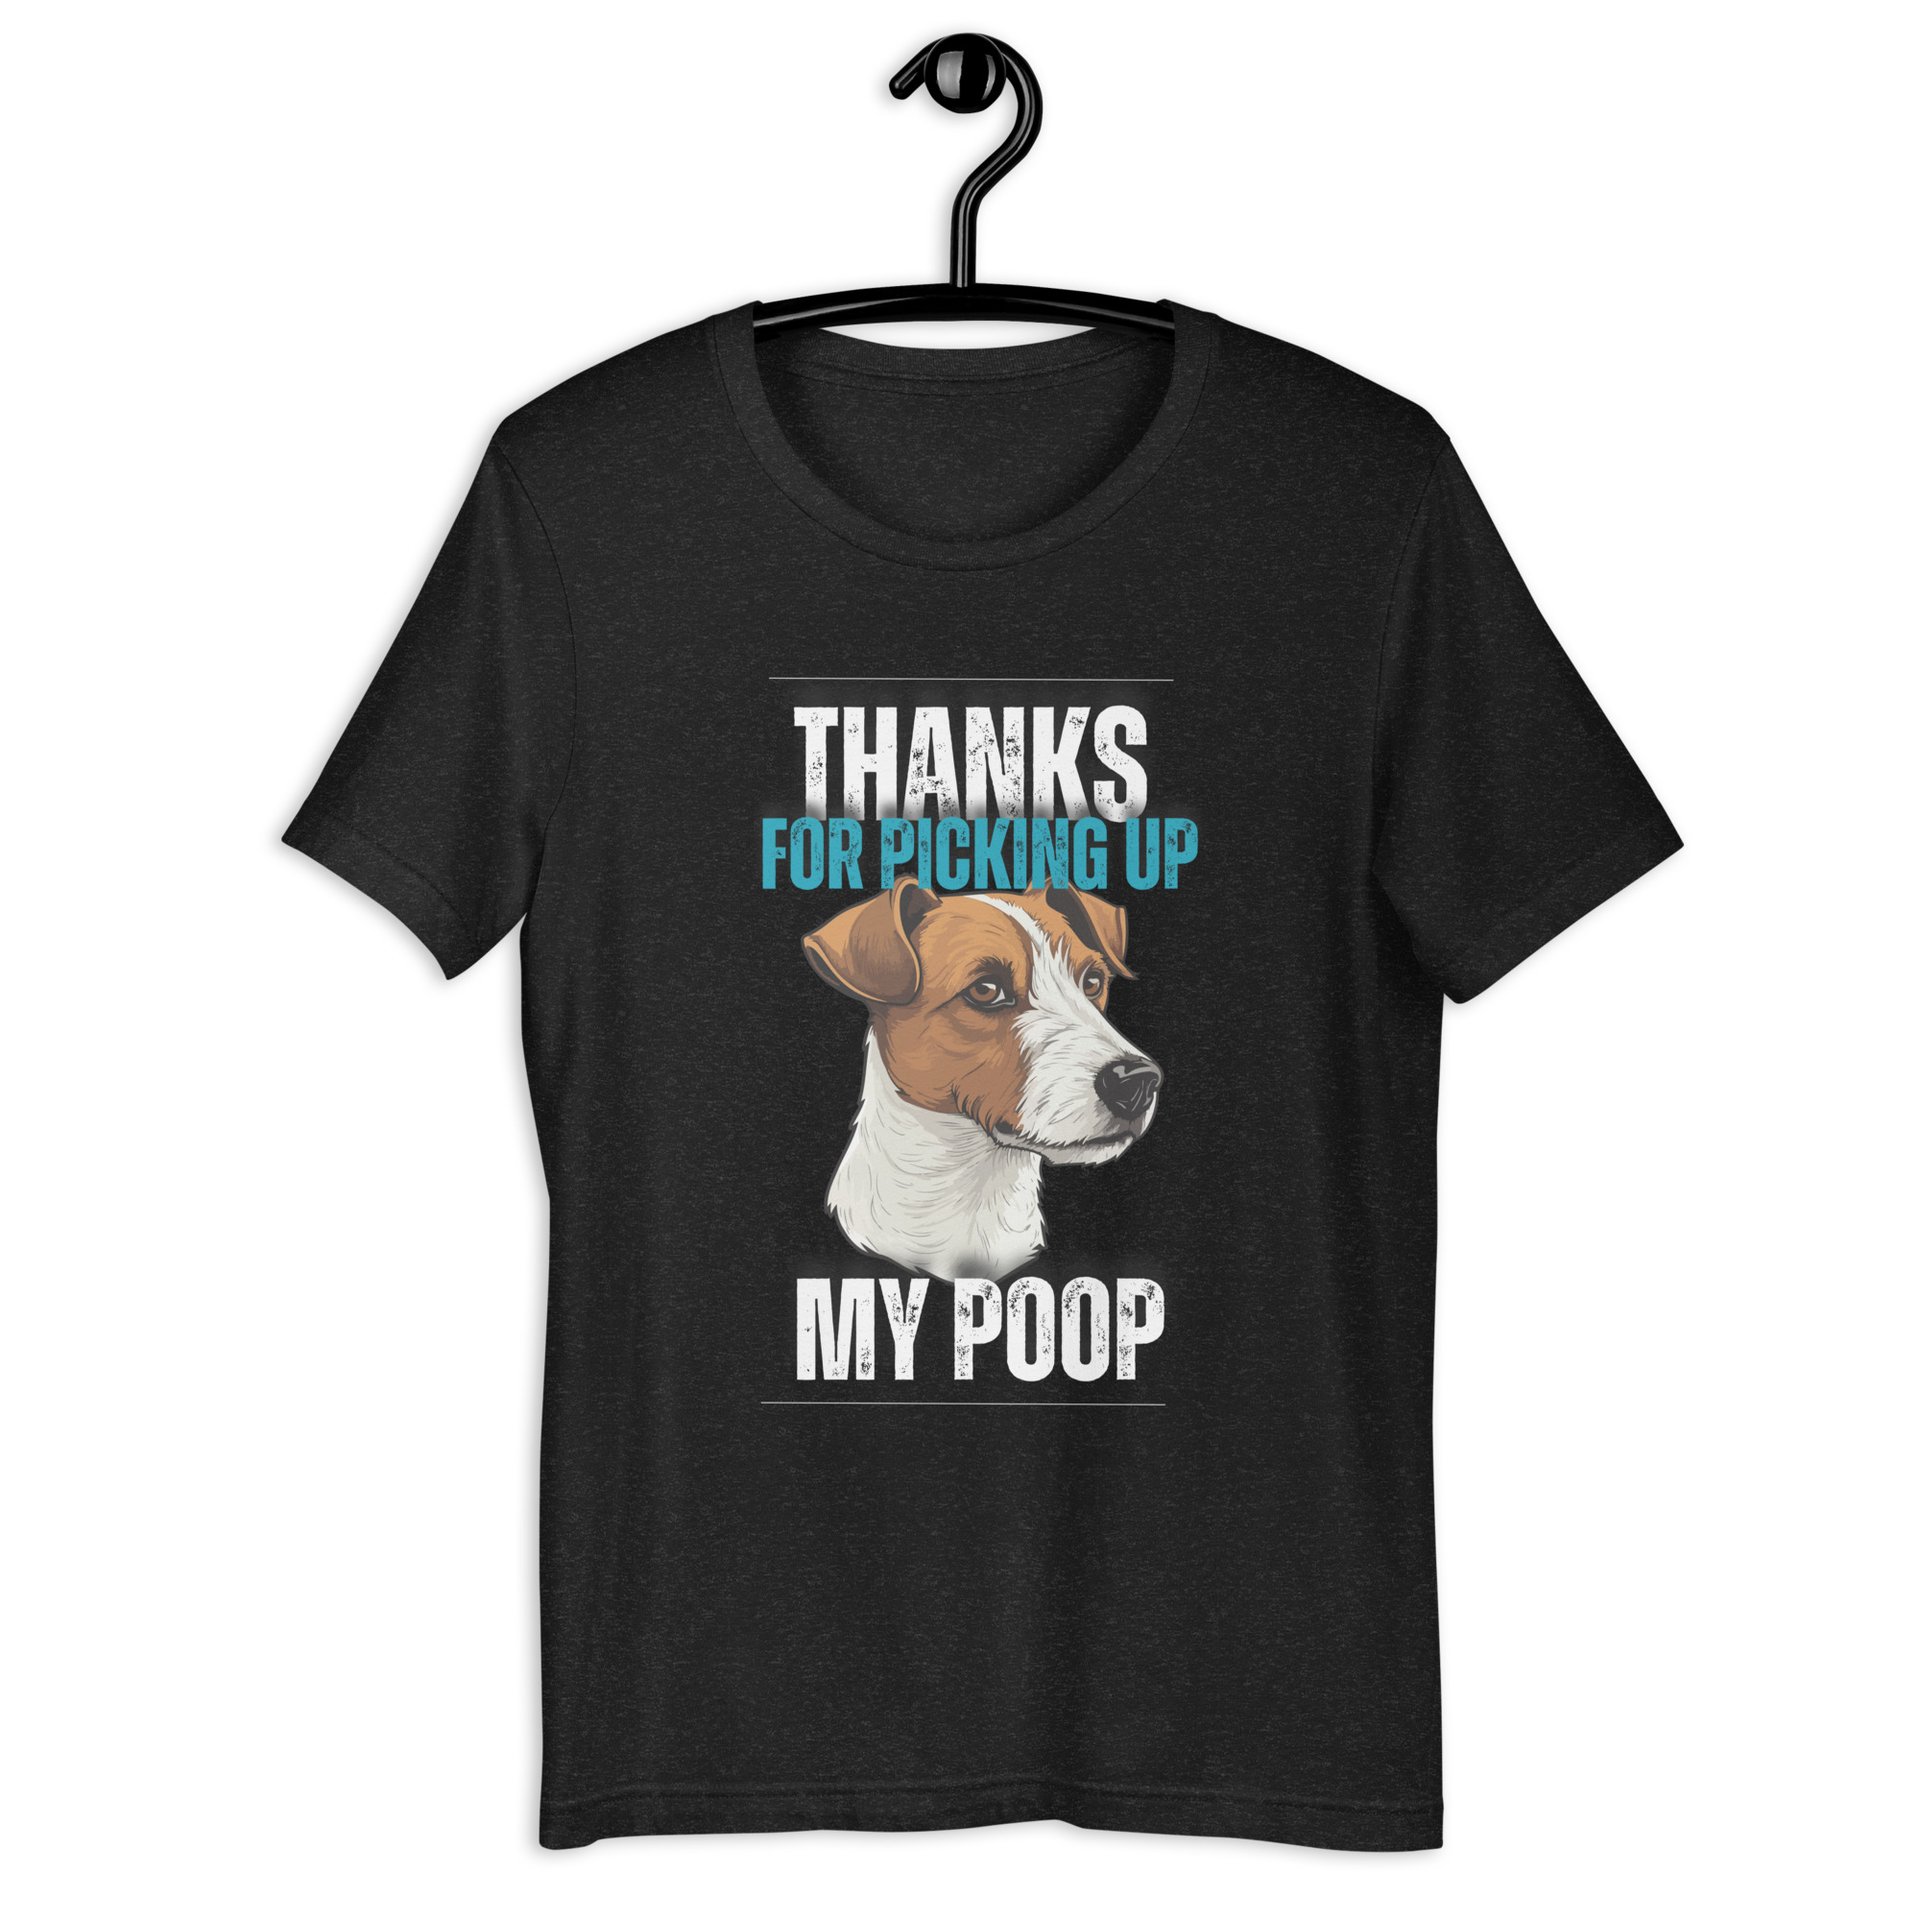 Thanks For Picking Up My POOP Funny Retrievers Unisex T-Shirt. Black Heather